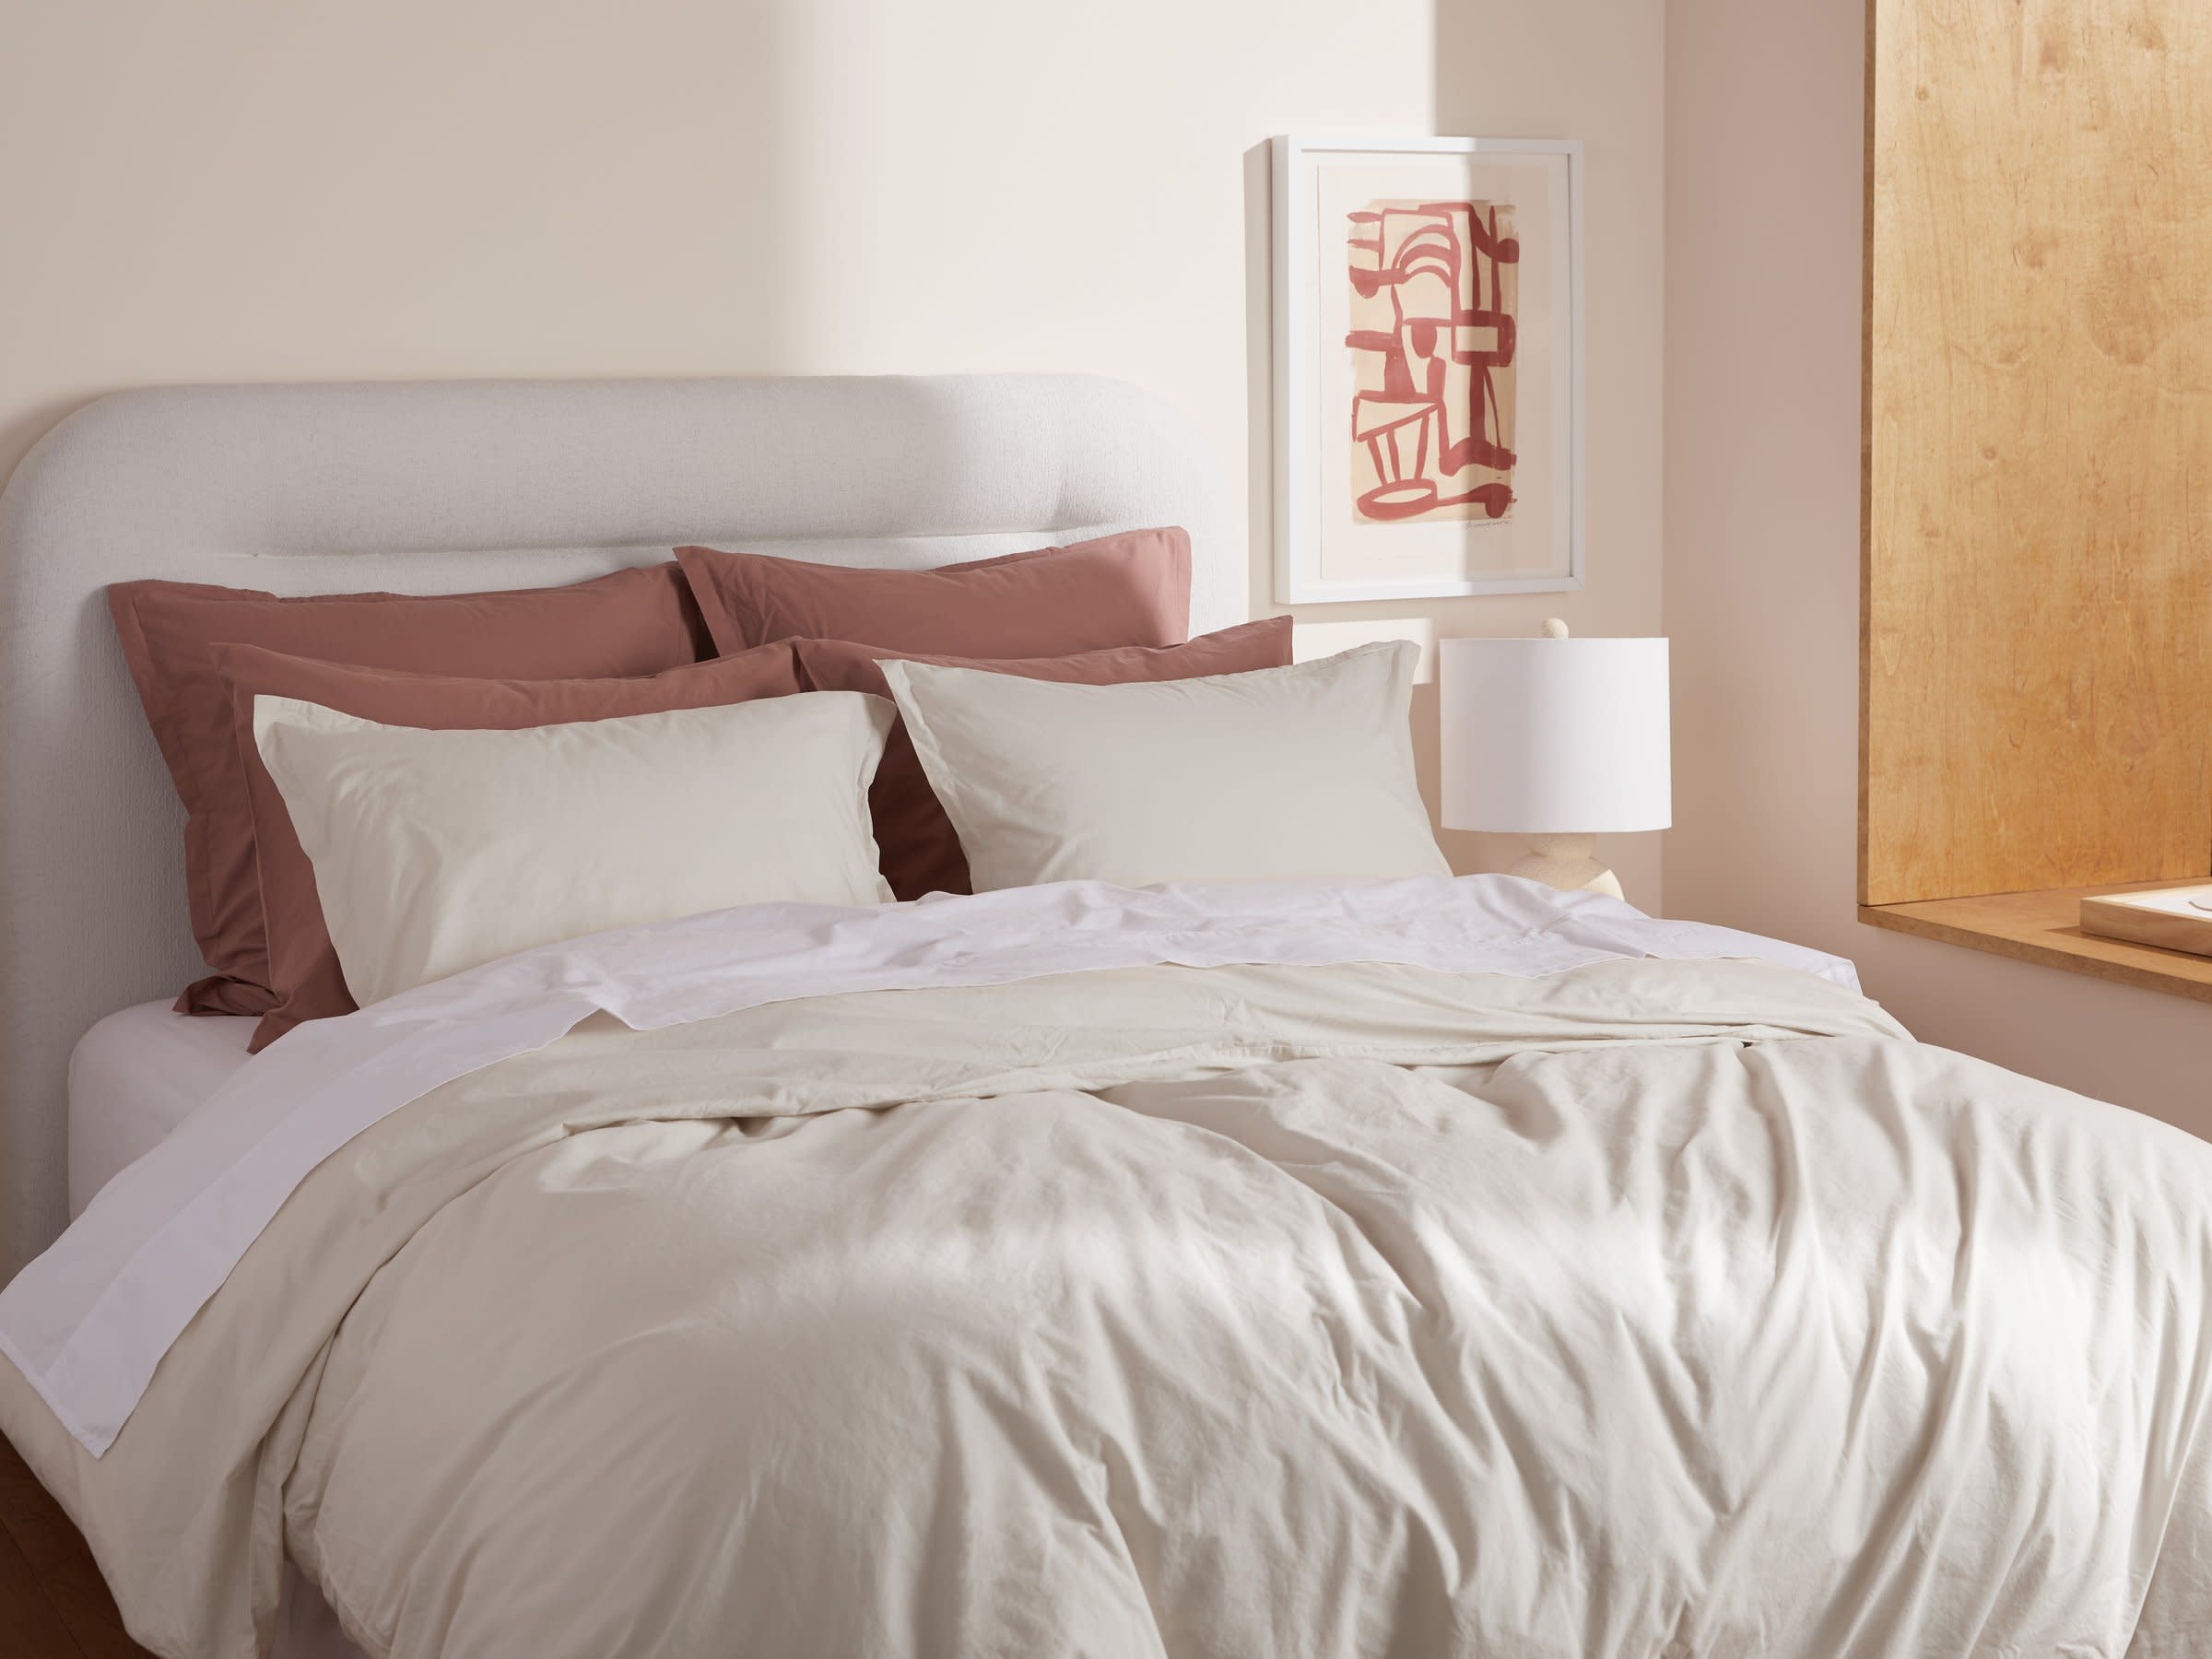 Ivory Brushed Cotton Duvet Cover Set Shown In A Room